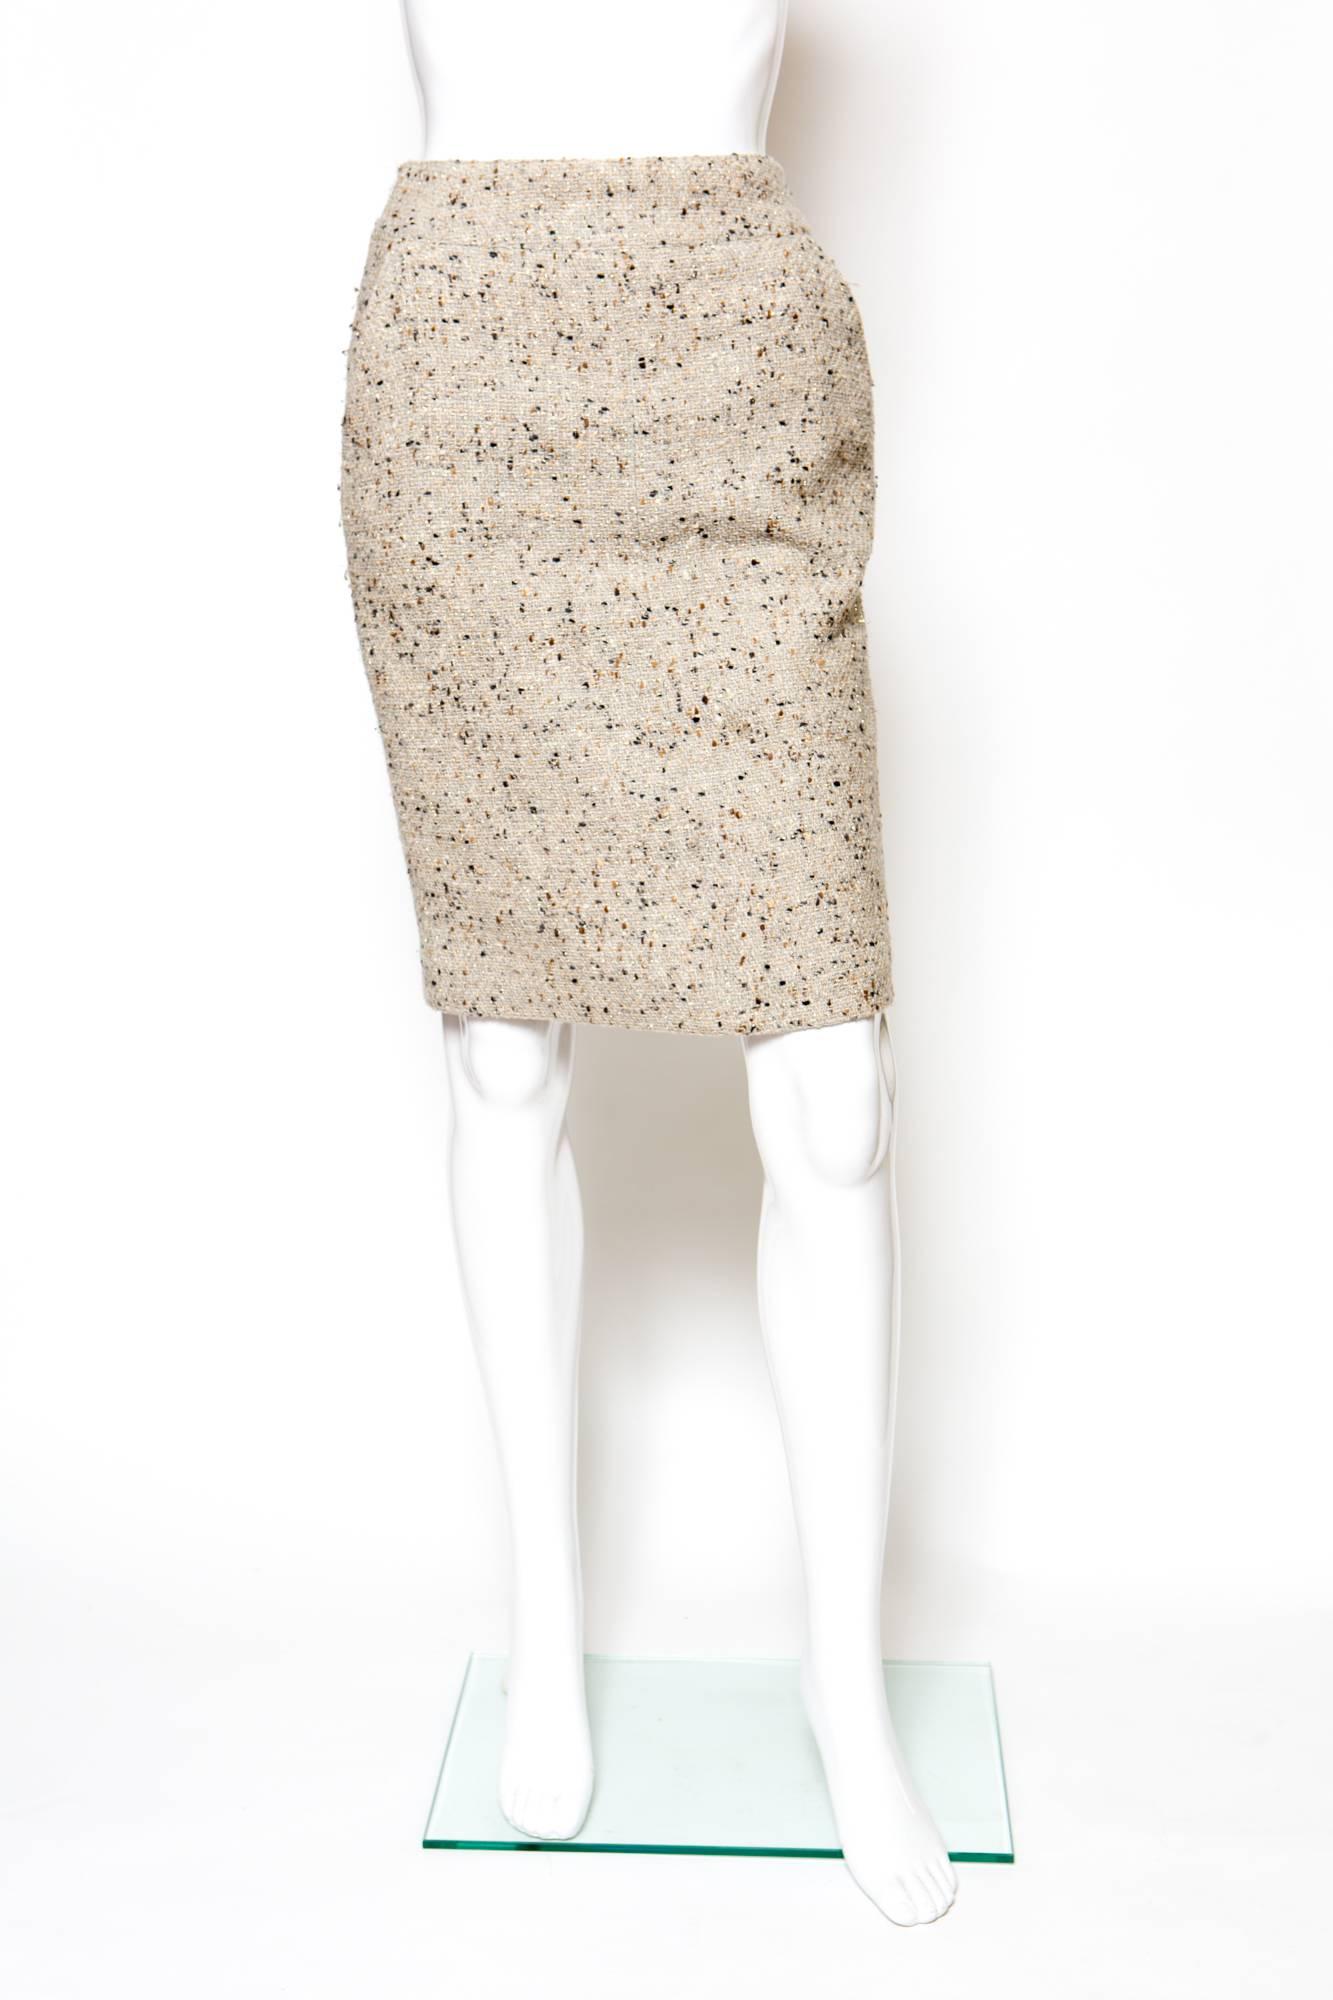  Chanel camel tweed and lurex short pencil skirt( 87 %wool, 13% polyamide) featuring a bottom center back slit logo zip: 17cm,2 logo buttons at center back waistband, 2 front pockets, and a fully silk lining.  
Chanel label size 34fr
